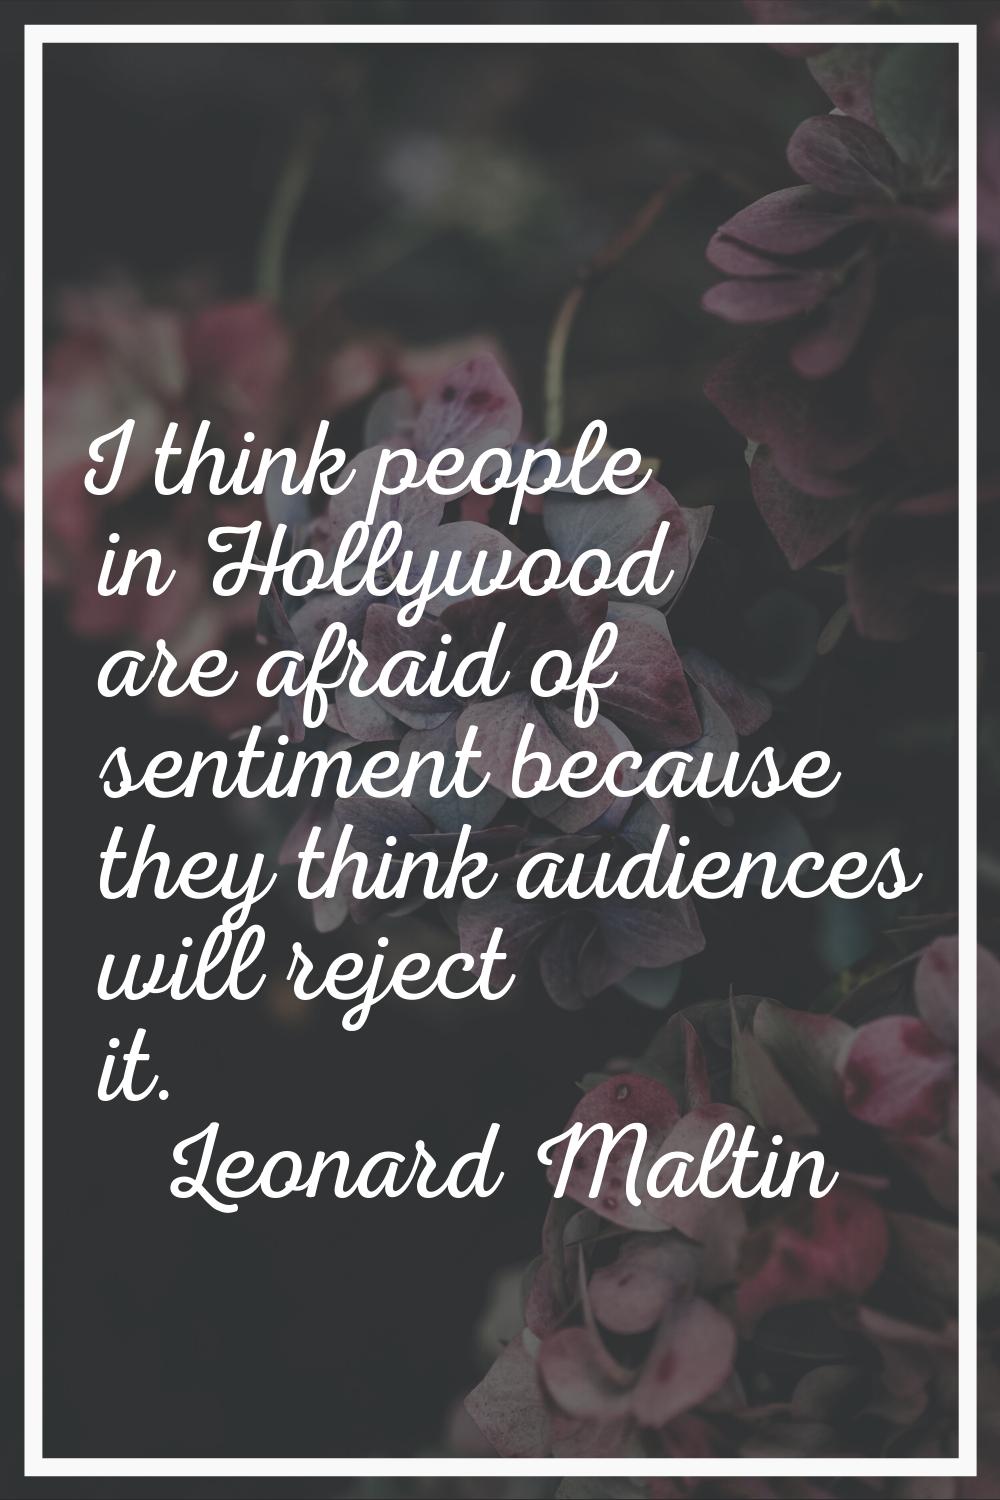 I think people in Hollywood are afraid of sentiment because they think audiences will reject it.